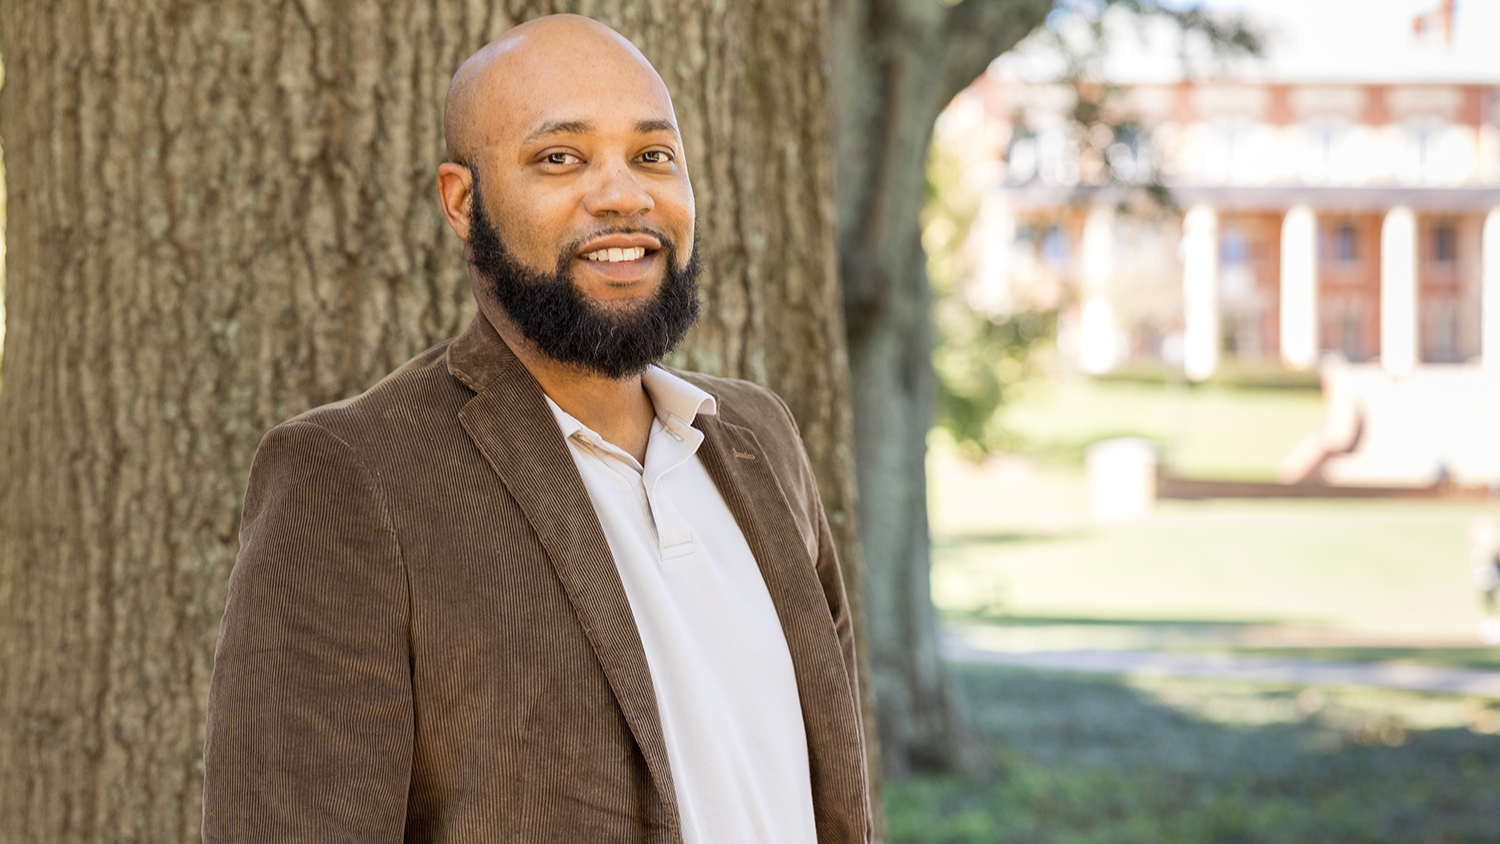 NC State College of Education doctoral student Rodney O'Neal